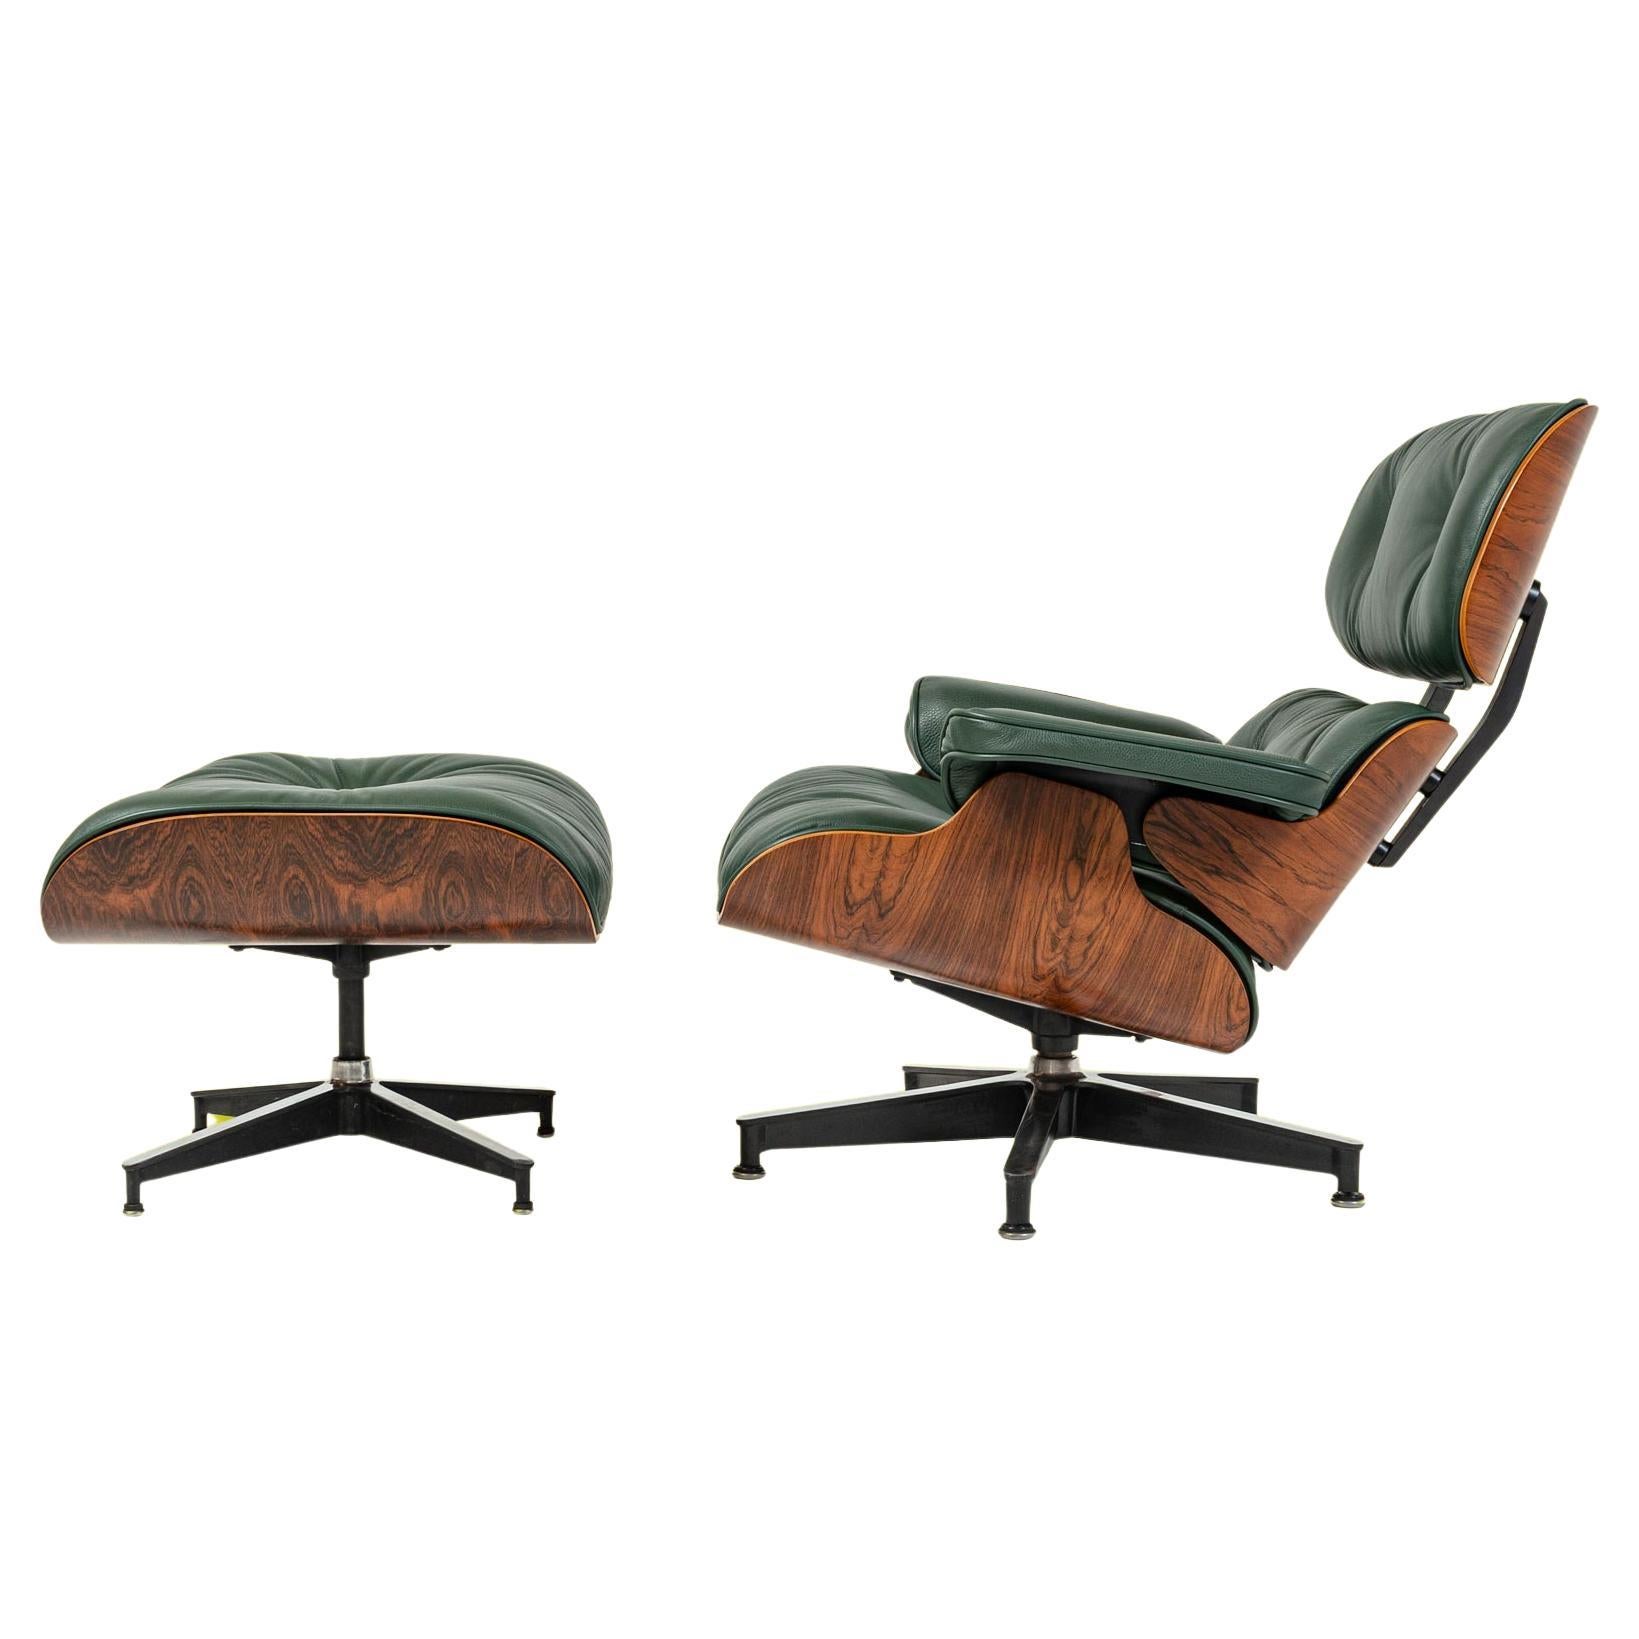 3rd Gen Eames Lounge Chair 670-671 in Elmo Baltique Forest Green Leather